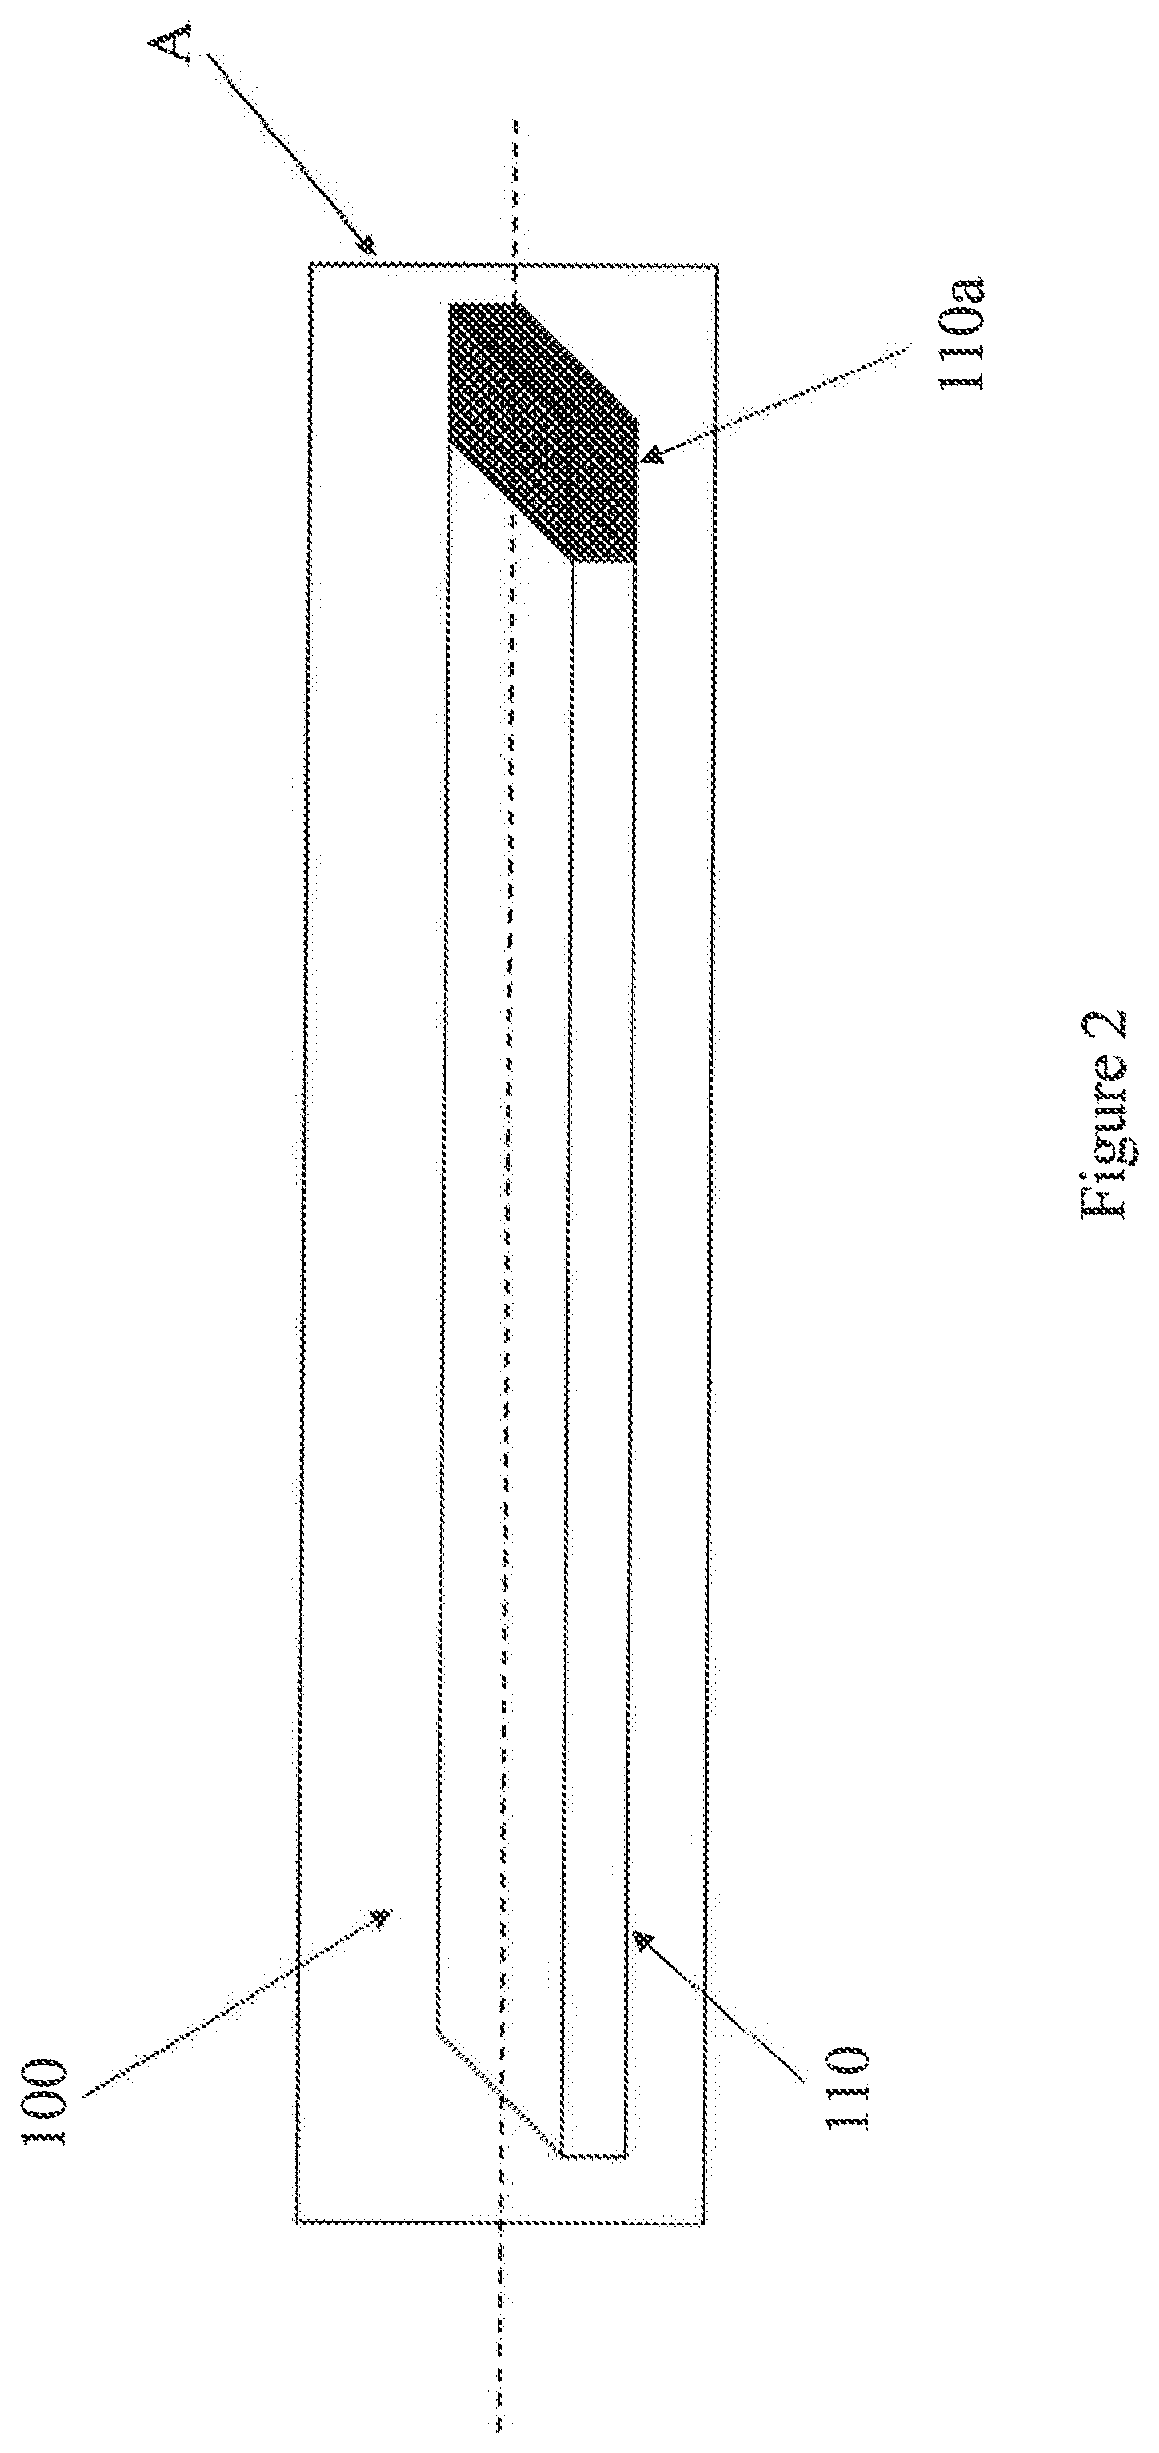 Photovoltaic devices comprising luminescent solar concentrators and perovskite-based photovoltaic cells